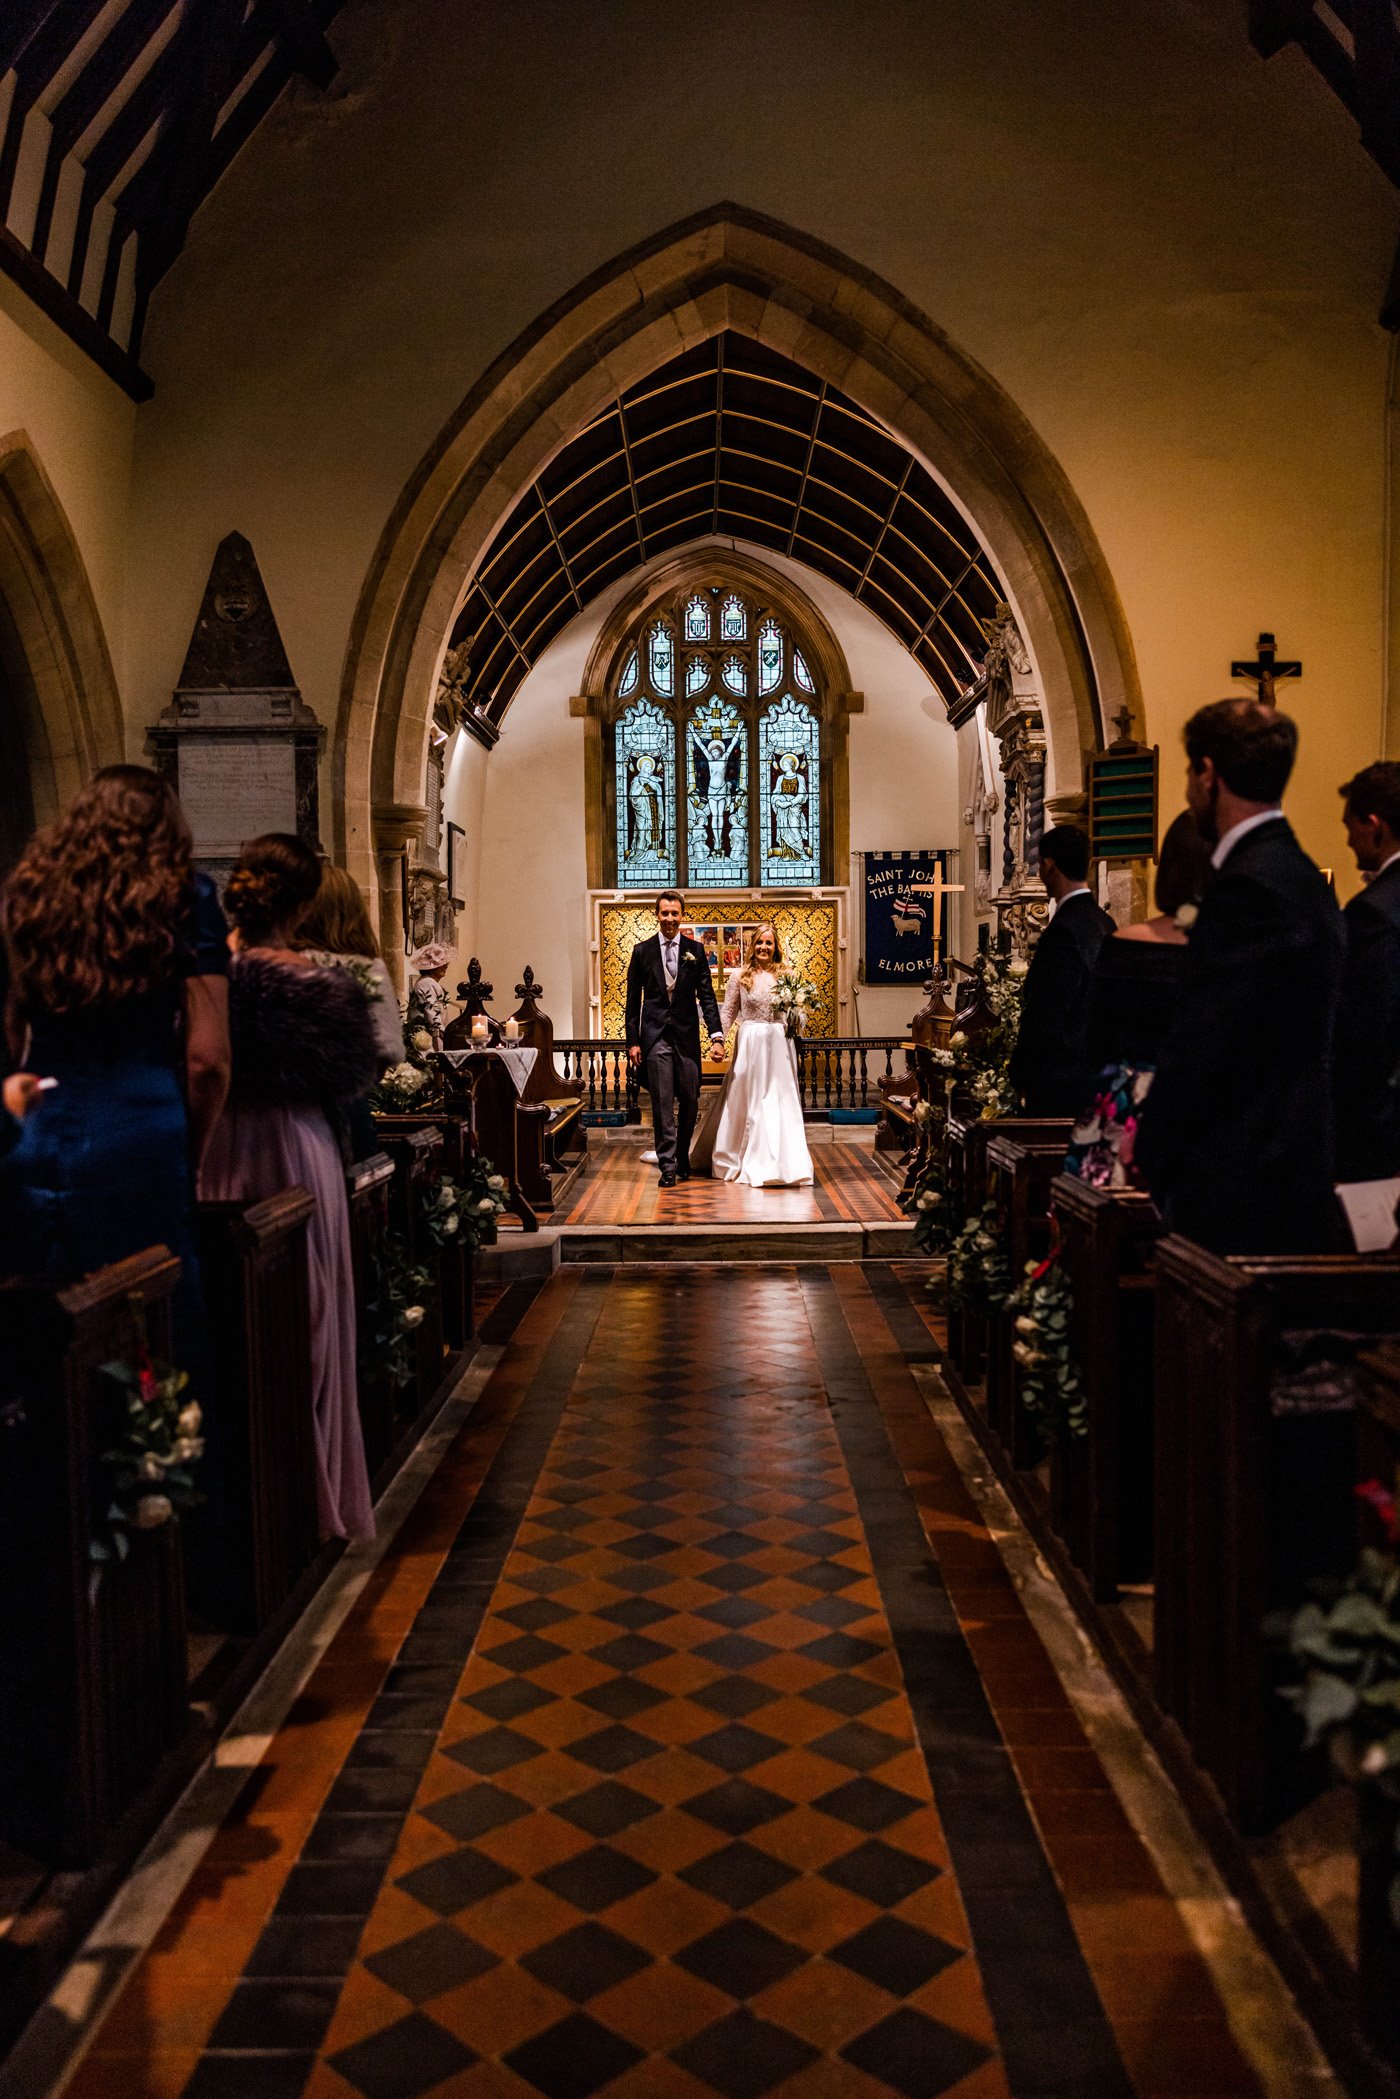 Pretty church wedding bride and groom walk towards with stained glass window in background and atmospheric dim light